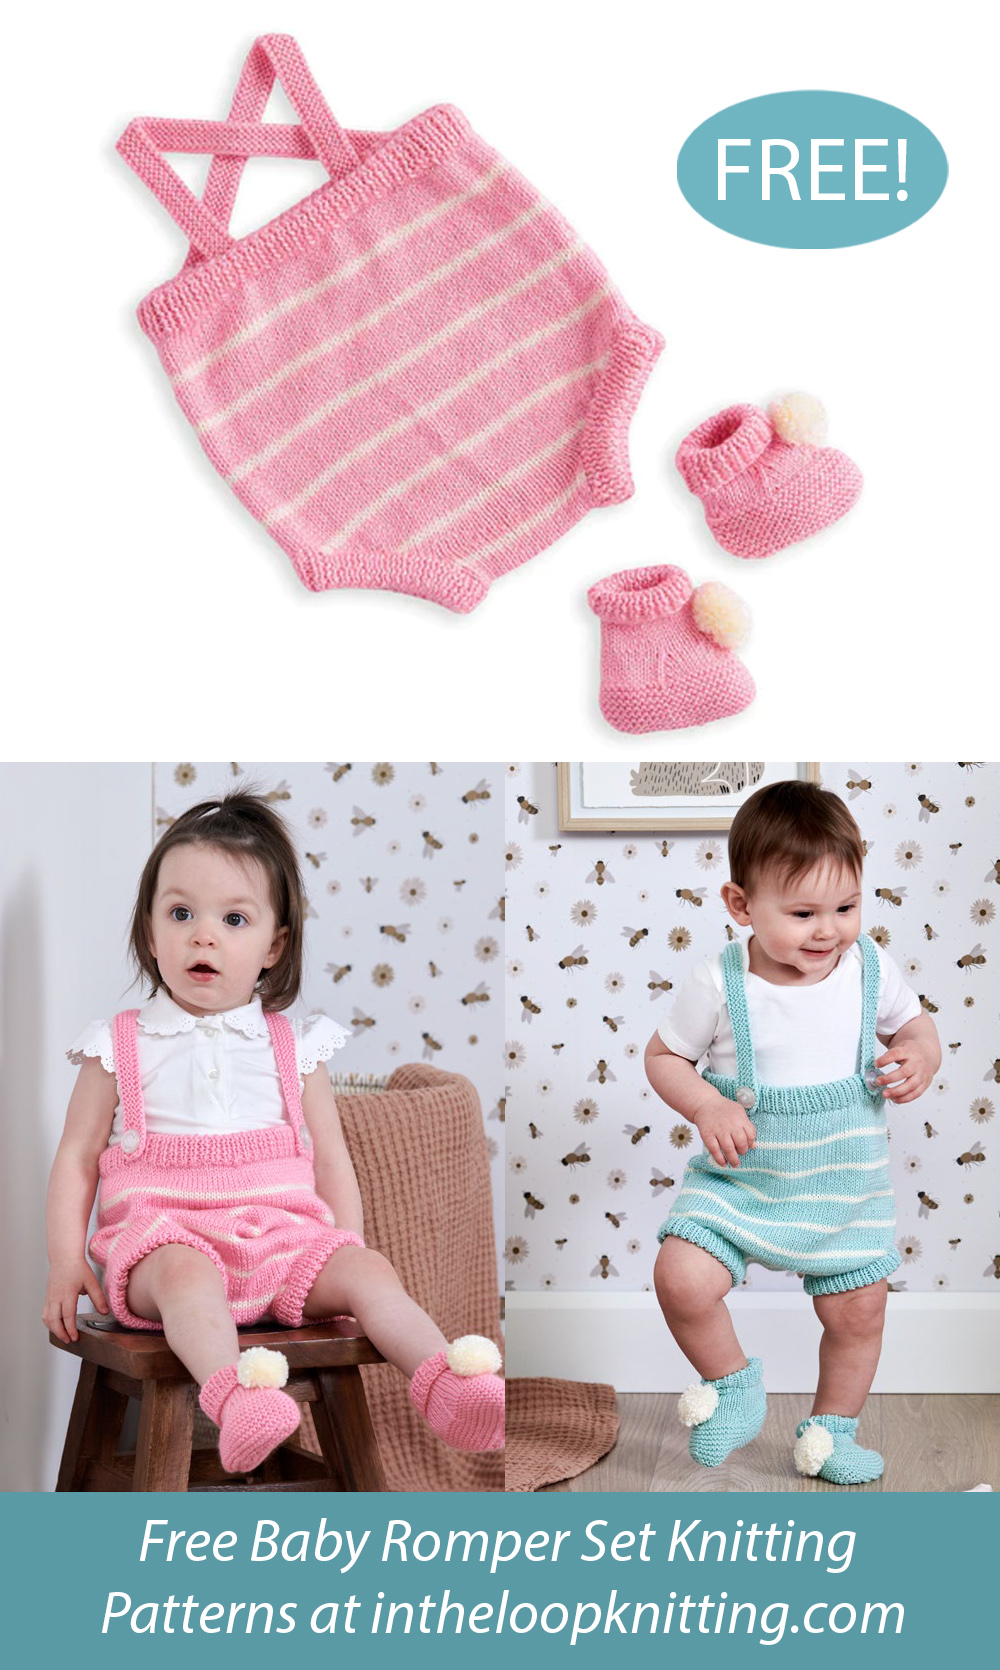 Free Baby Romper and Booties Set Knitting Pattern